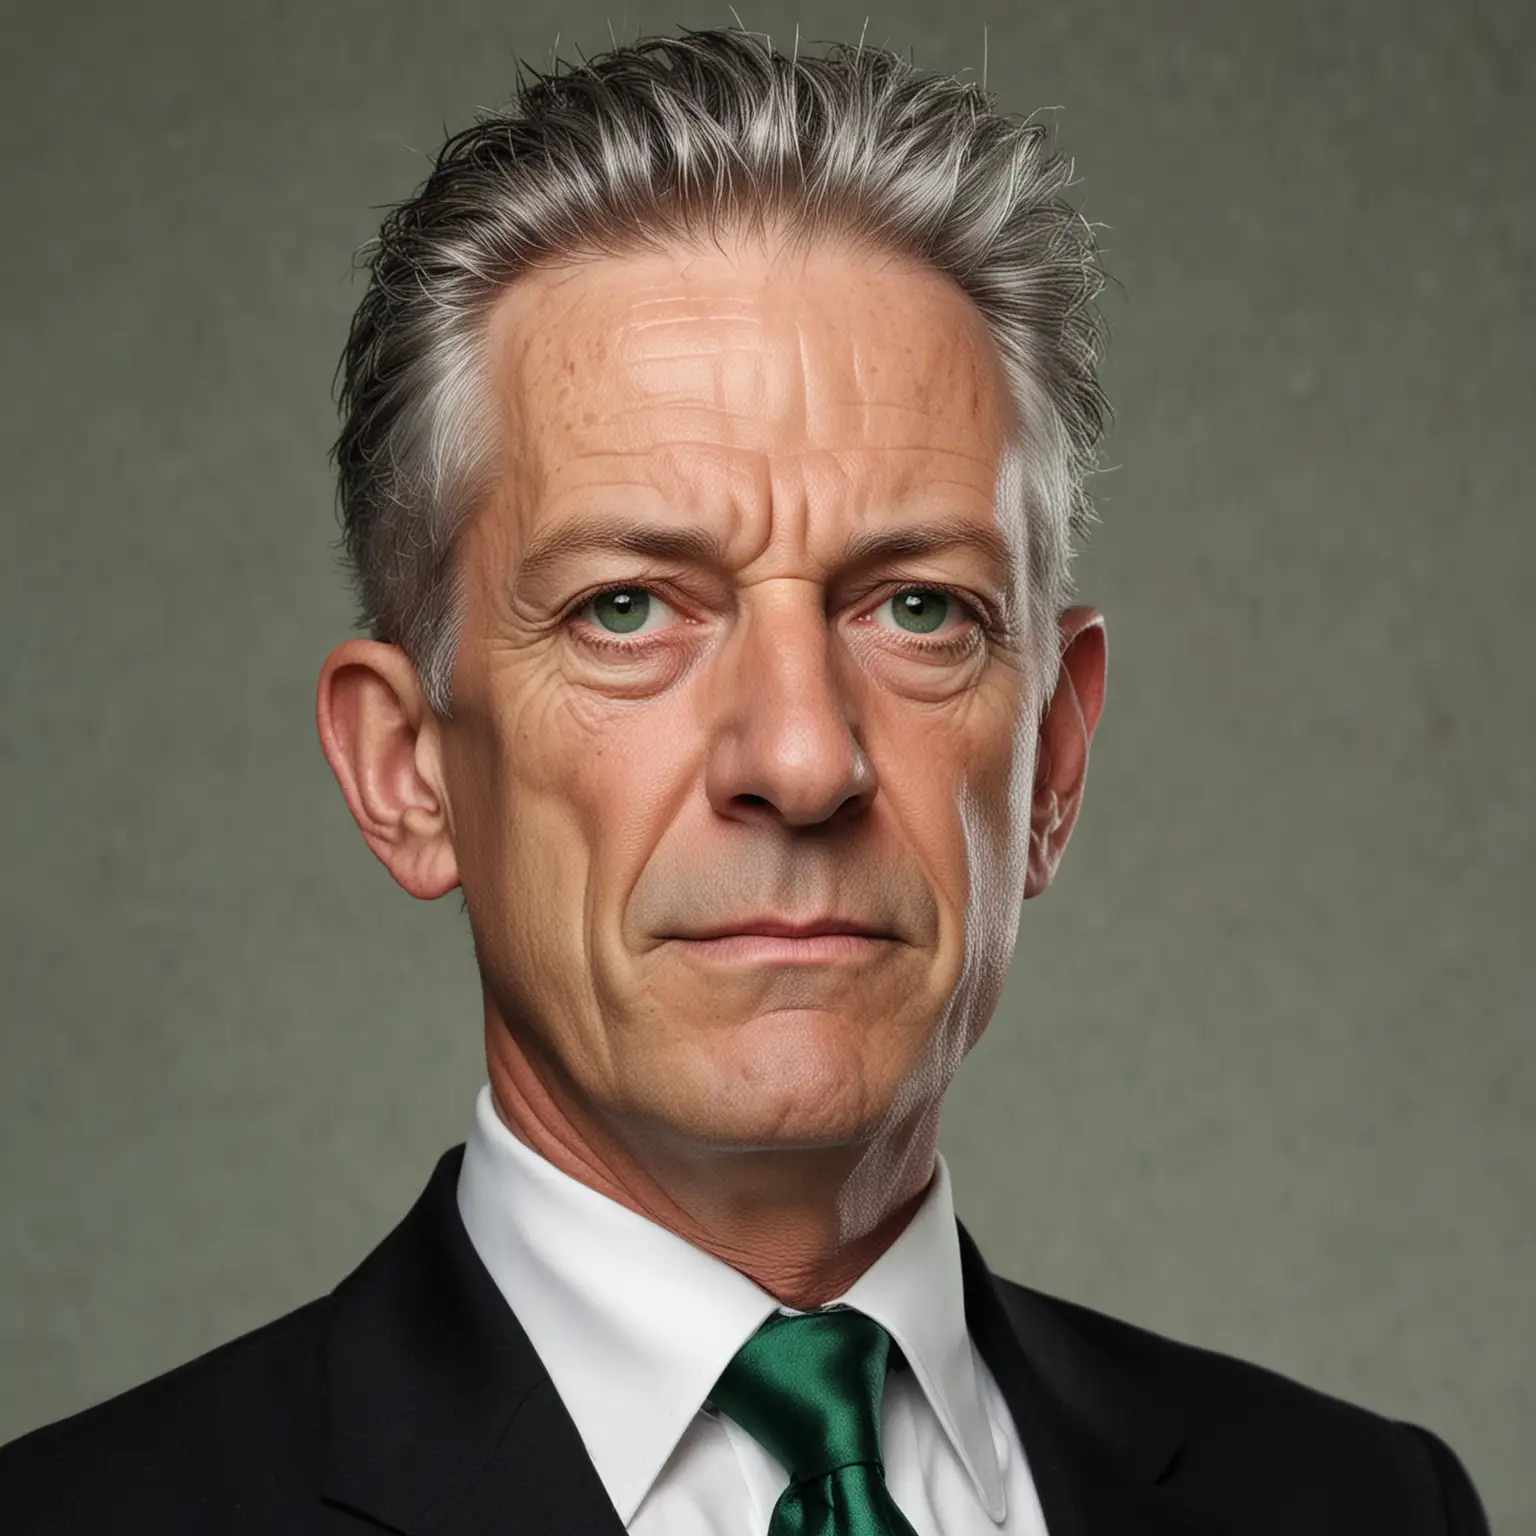 Portrait photograph. A rail thin man in his mid sixties. He wears a tailored black suit with an emerald green tie. He has close cropped salt and pepper hair and a hard expression.